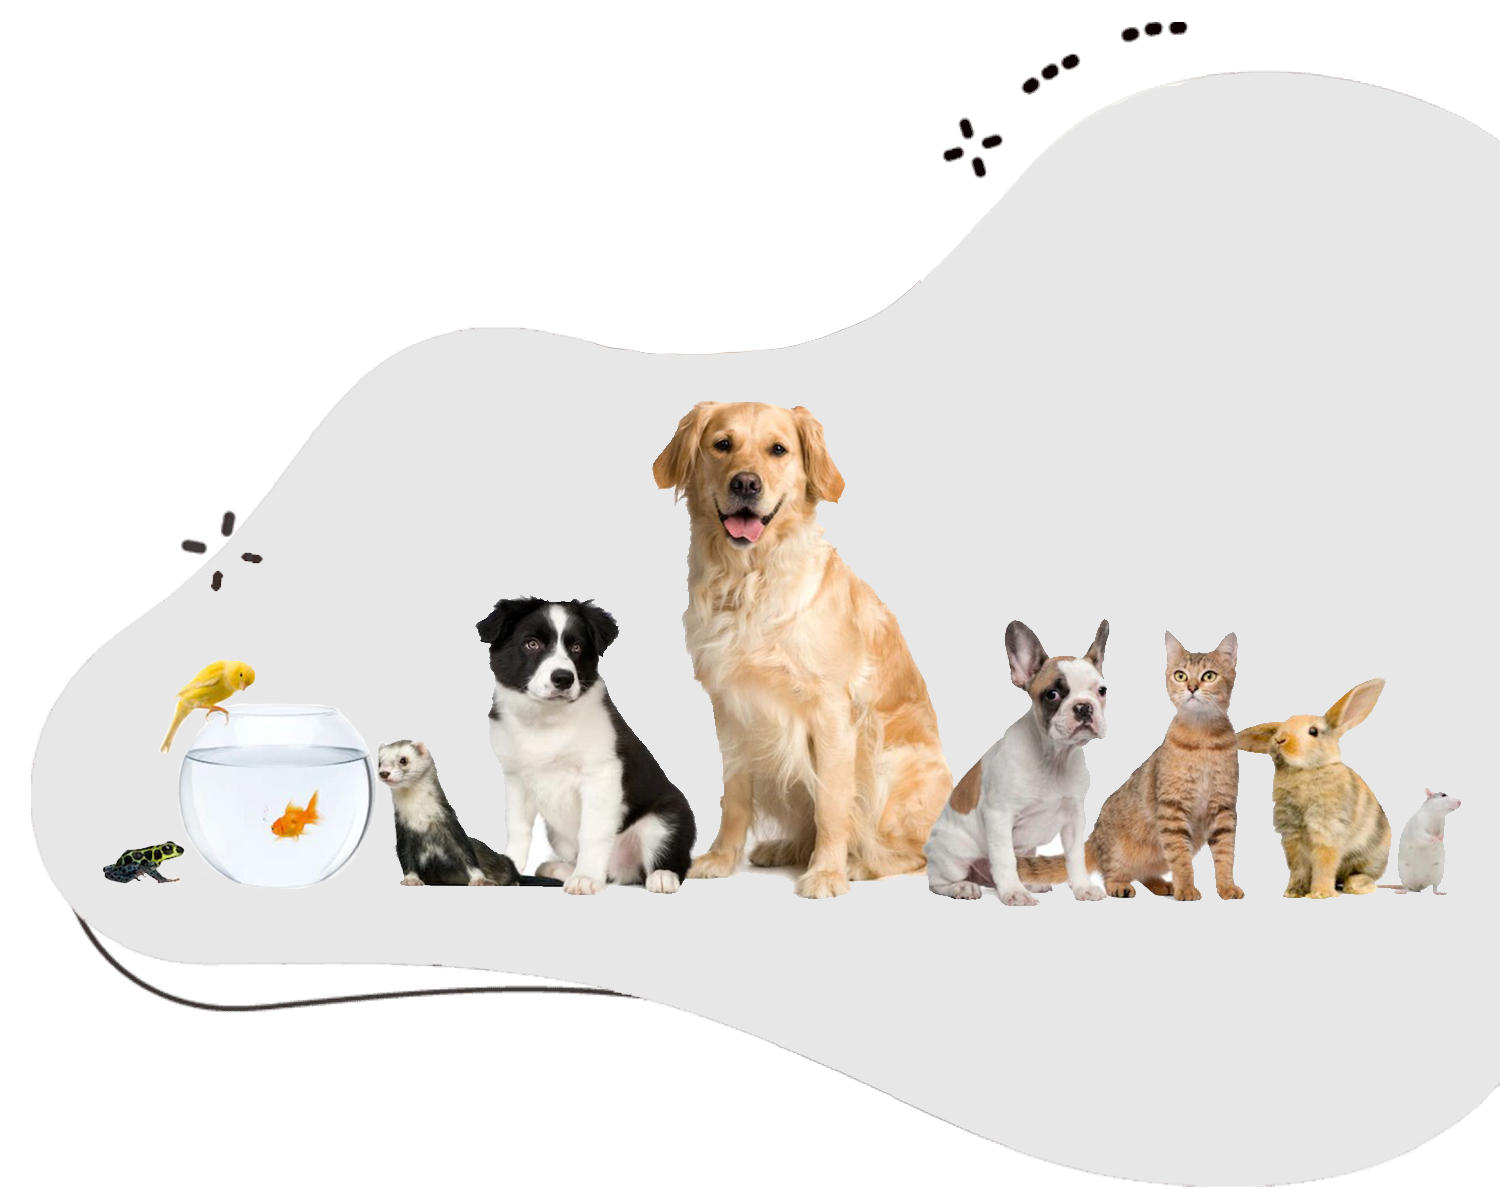 #1 Rated Pet Boarding Services in Abu Dhabi